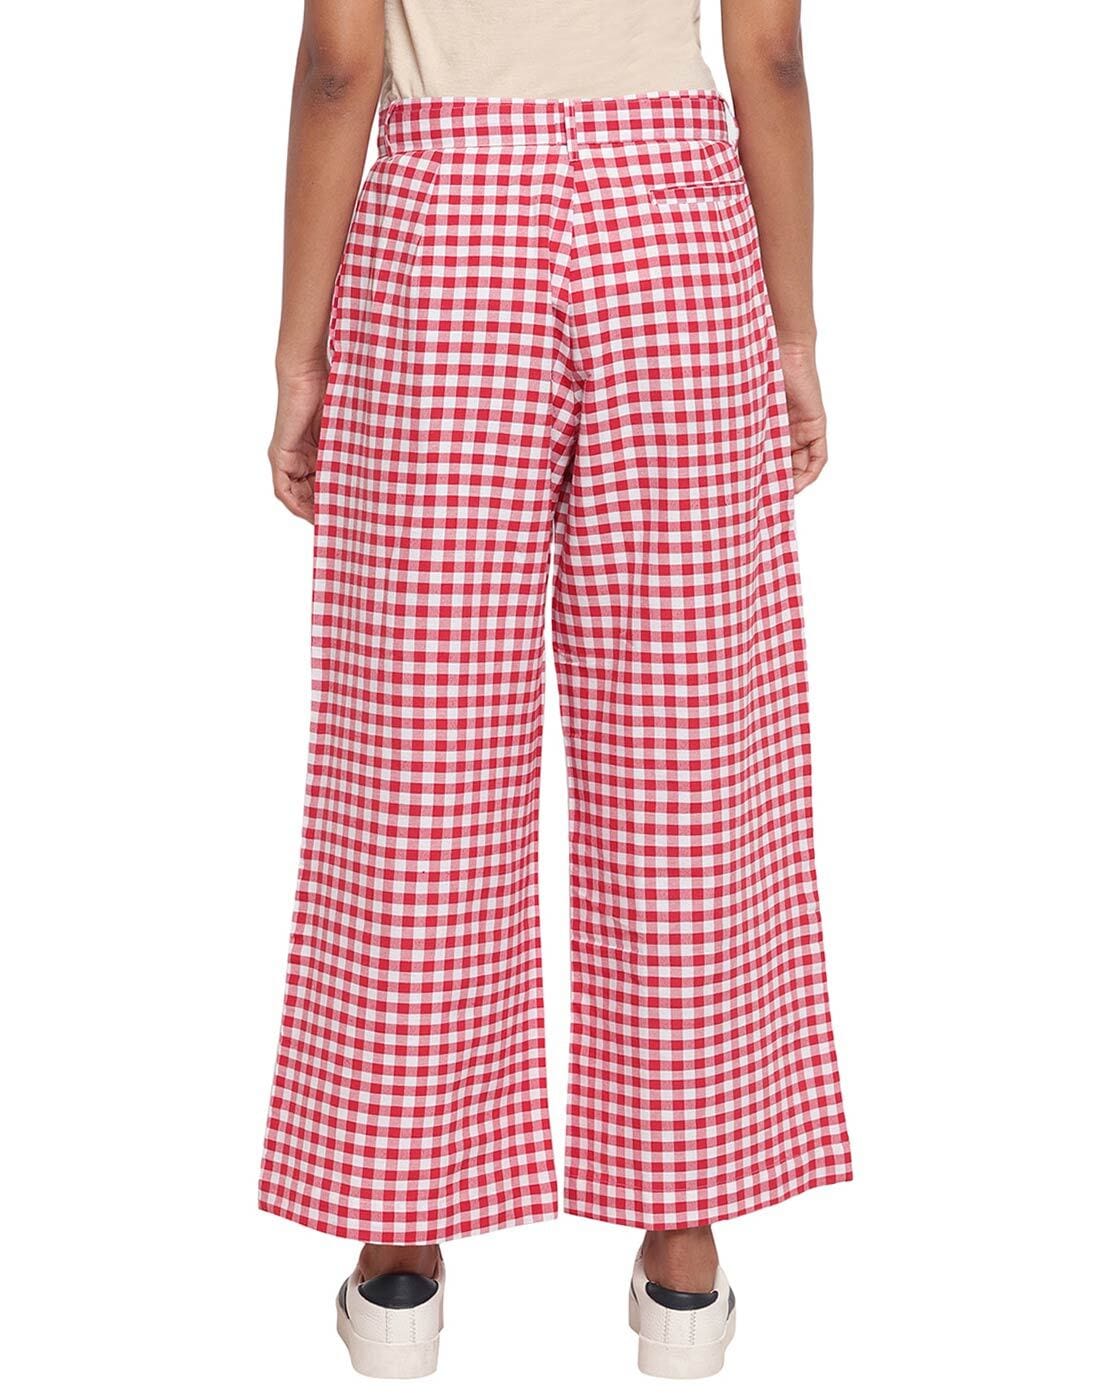 Red Rad Plaid  Pants  Sustainable fashion clothing and face masks